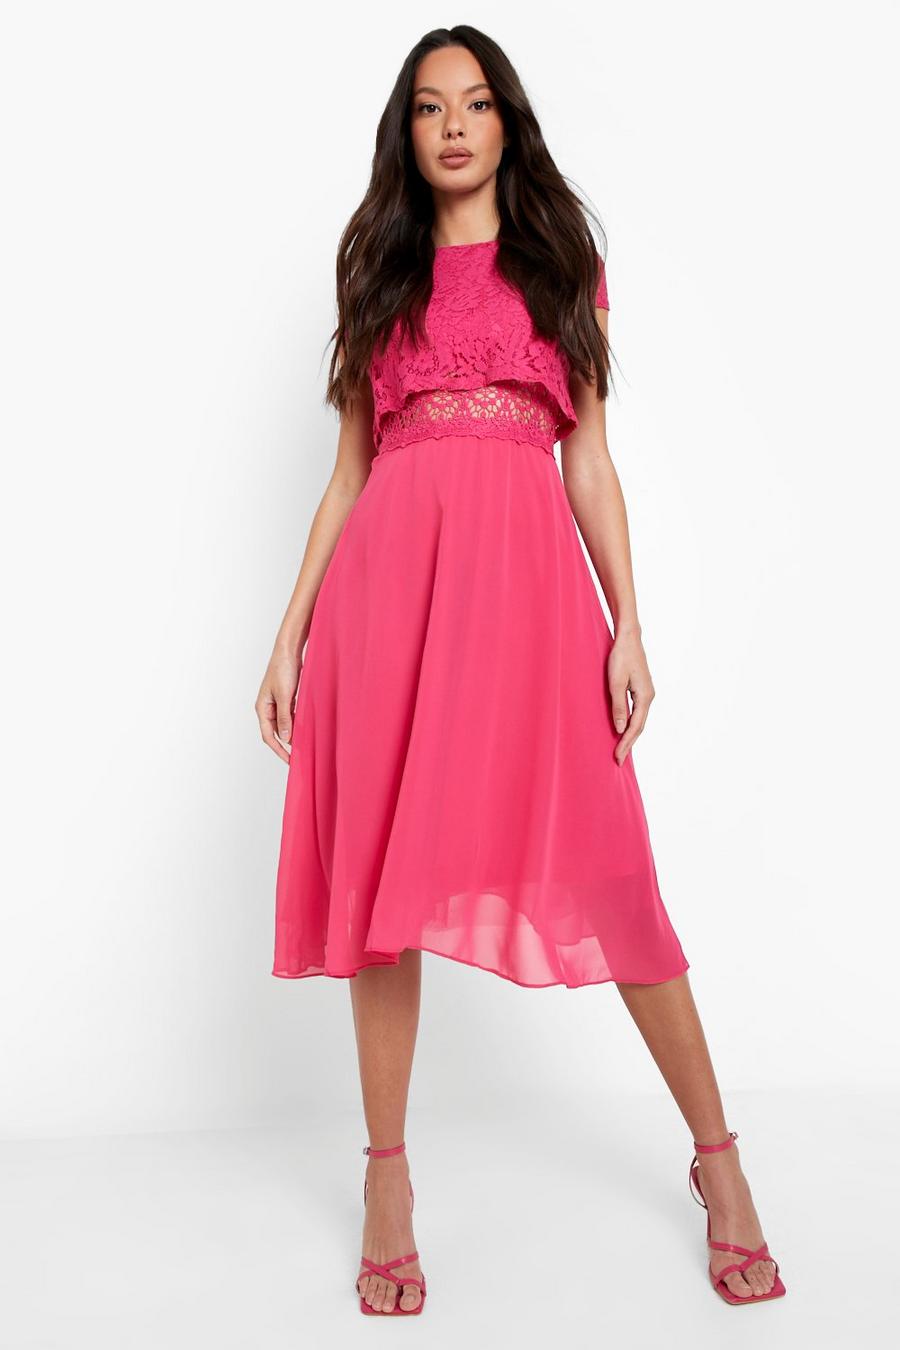 Berry Lace Top Chiffon Skater Dress image number 1